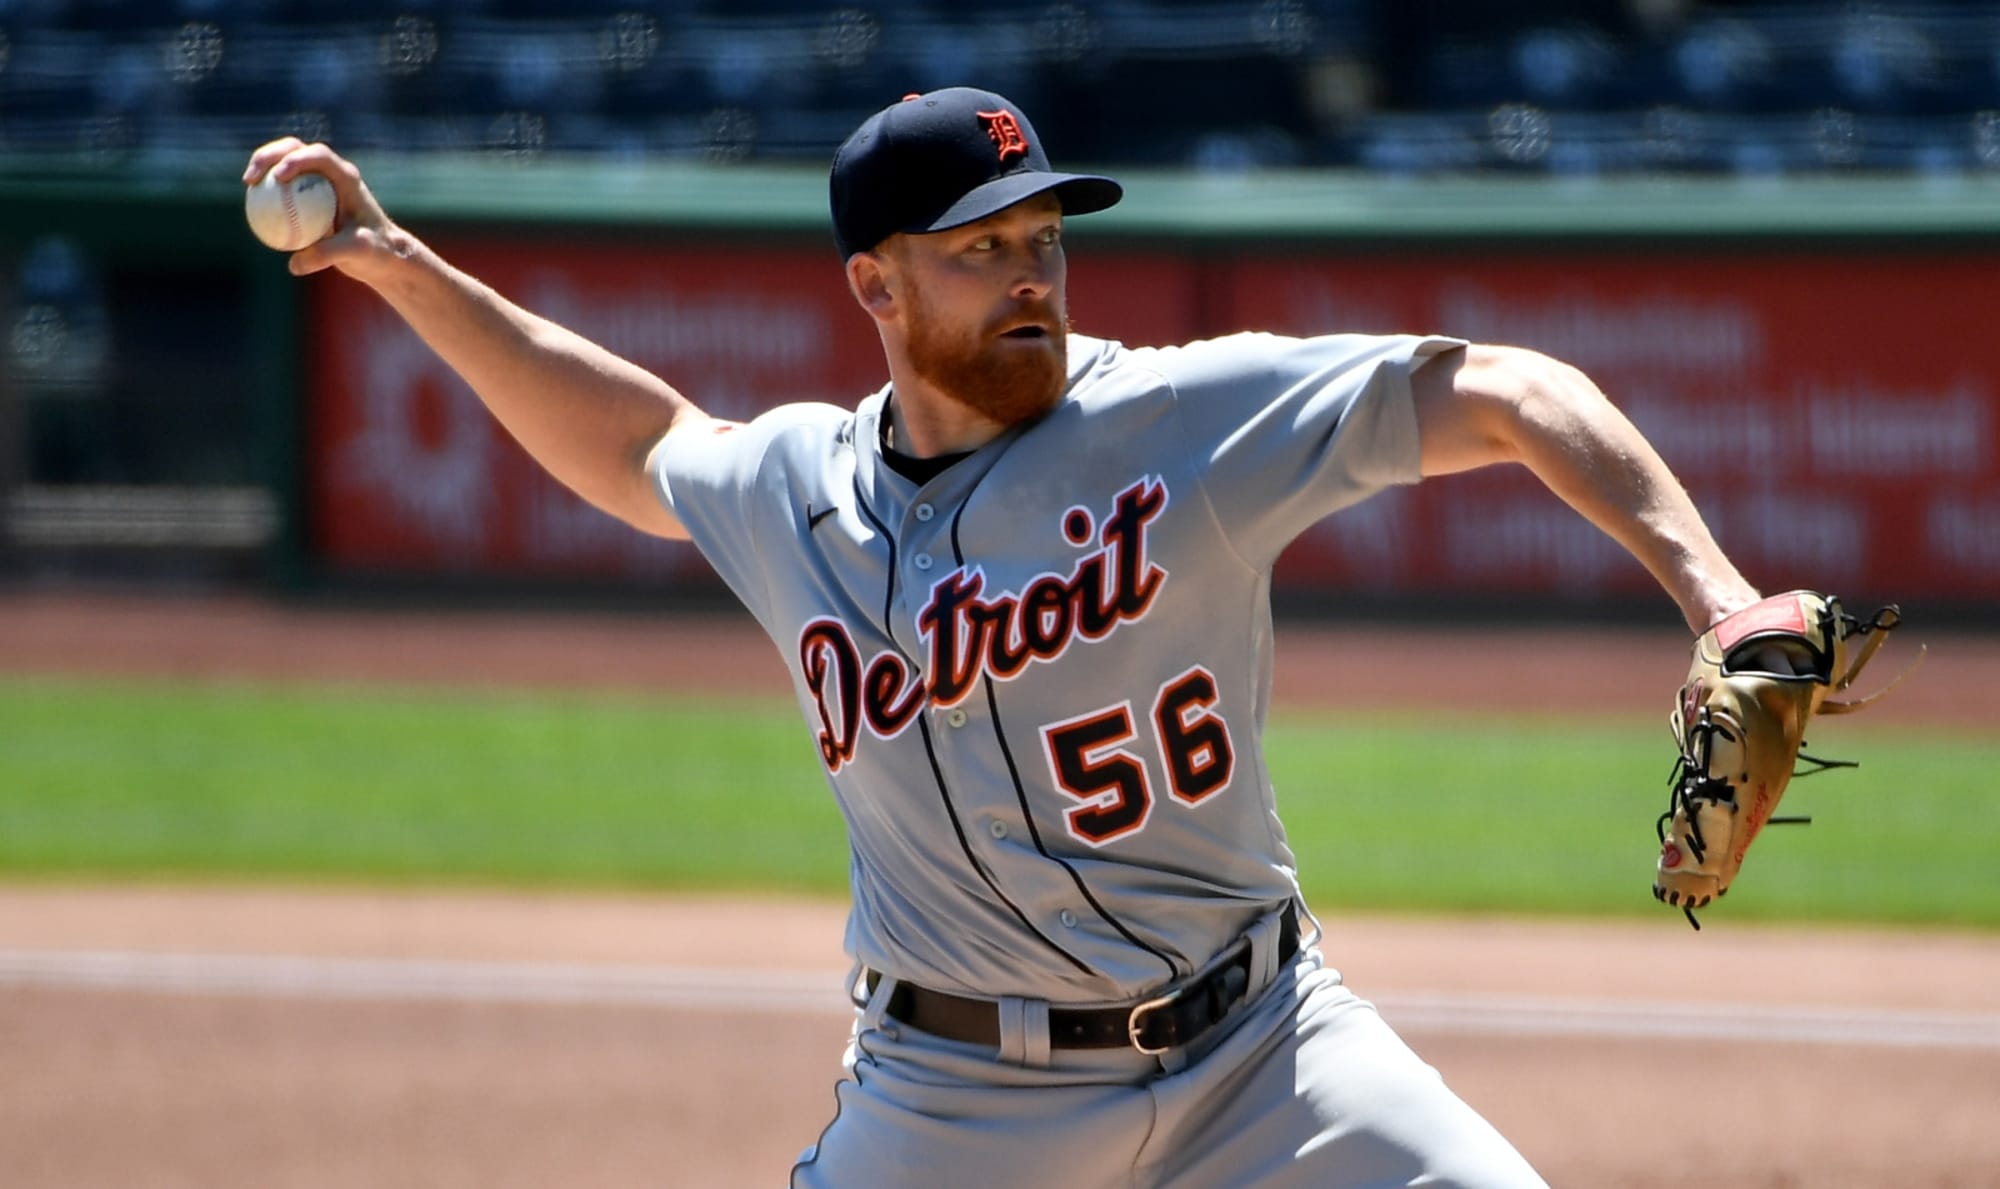 Tigers pitching staff in 2020: Matthew Boyd is ace, but questions